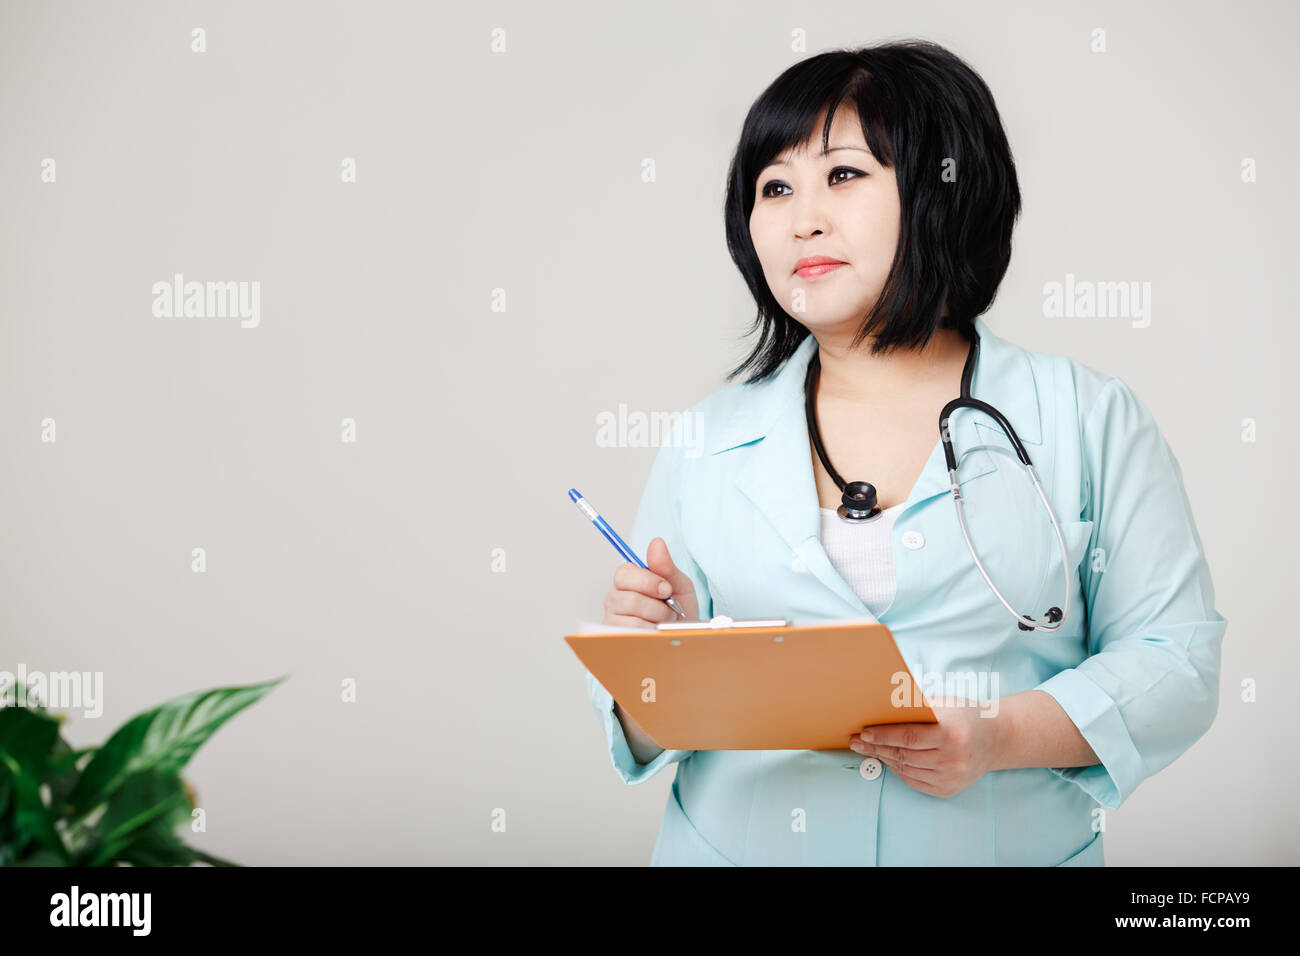 Curvy female nurse stands still writes the results by pen at paper, in medical lab coat with stethoscope around her neck. Asian appearance, dark short hair. Small vegetation on foreground. Stock Photo